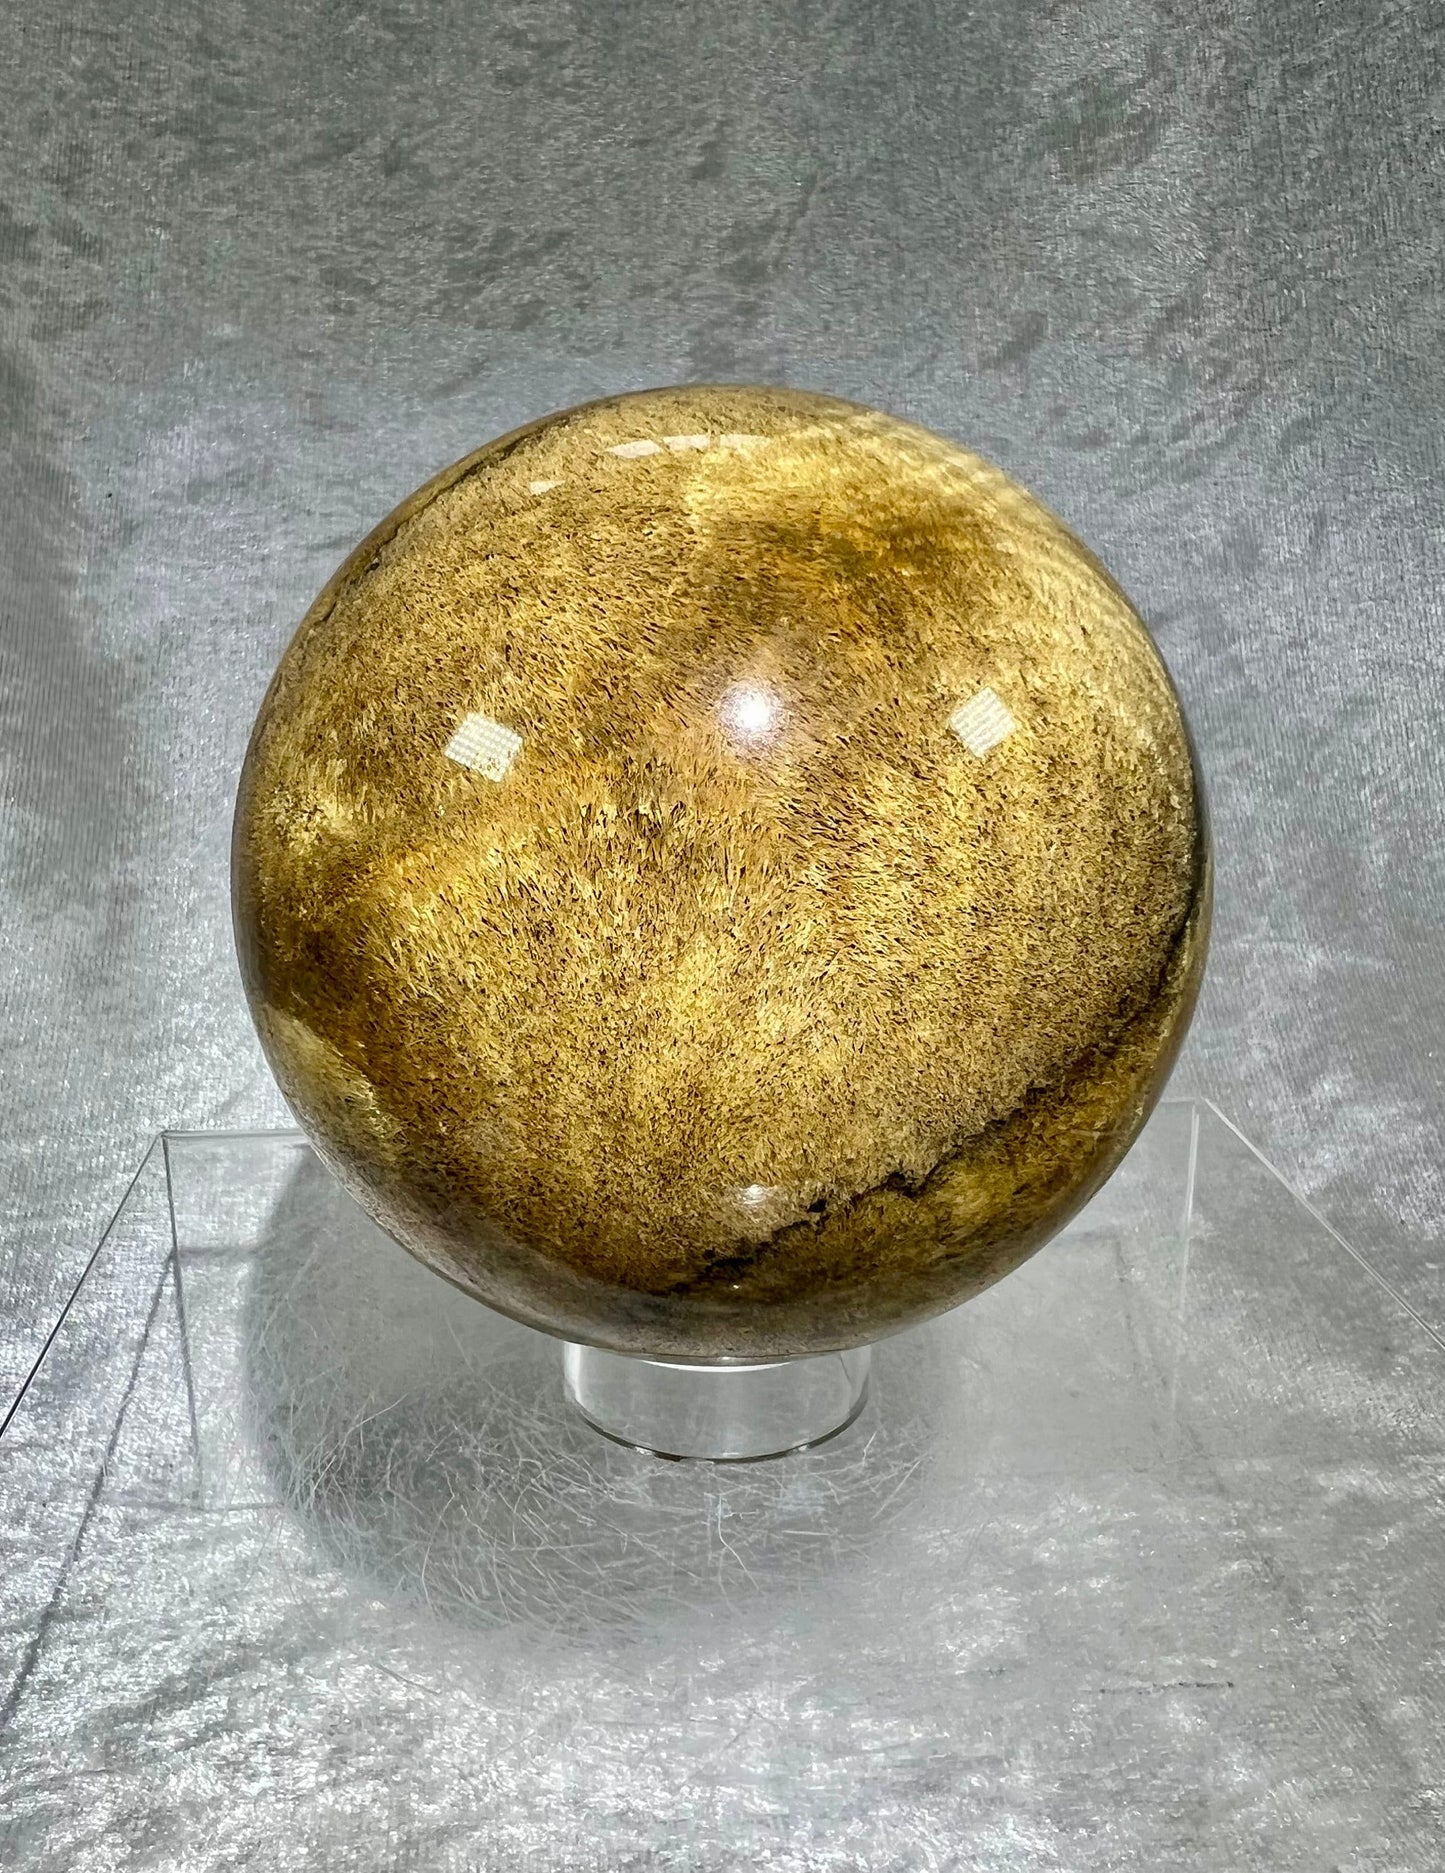 XL Rare Sagenite Agate Sphere. 87mm. High Quality Natural Sagenite Sphere. Beautiful Plume Inclusions